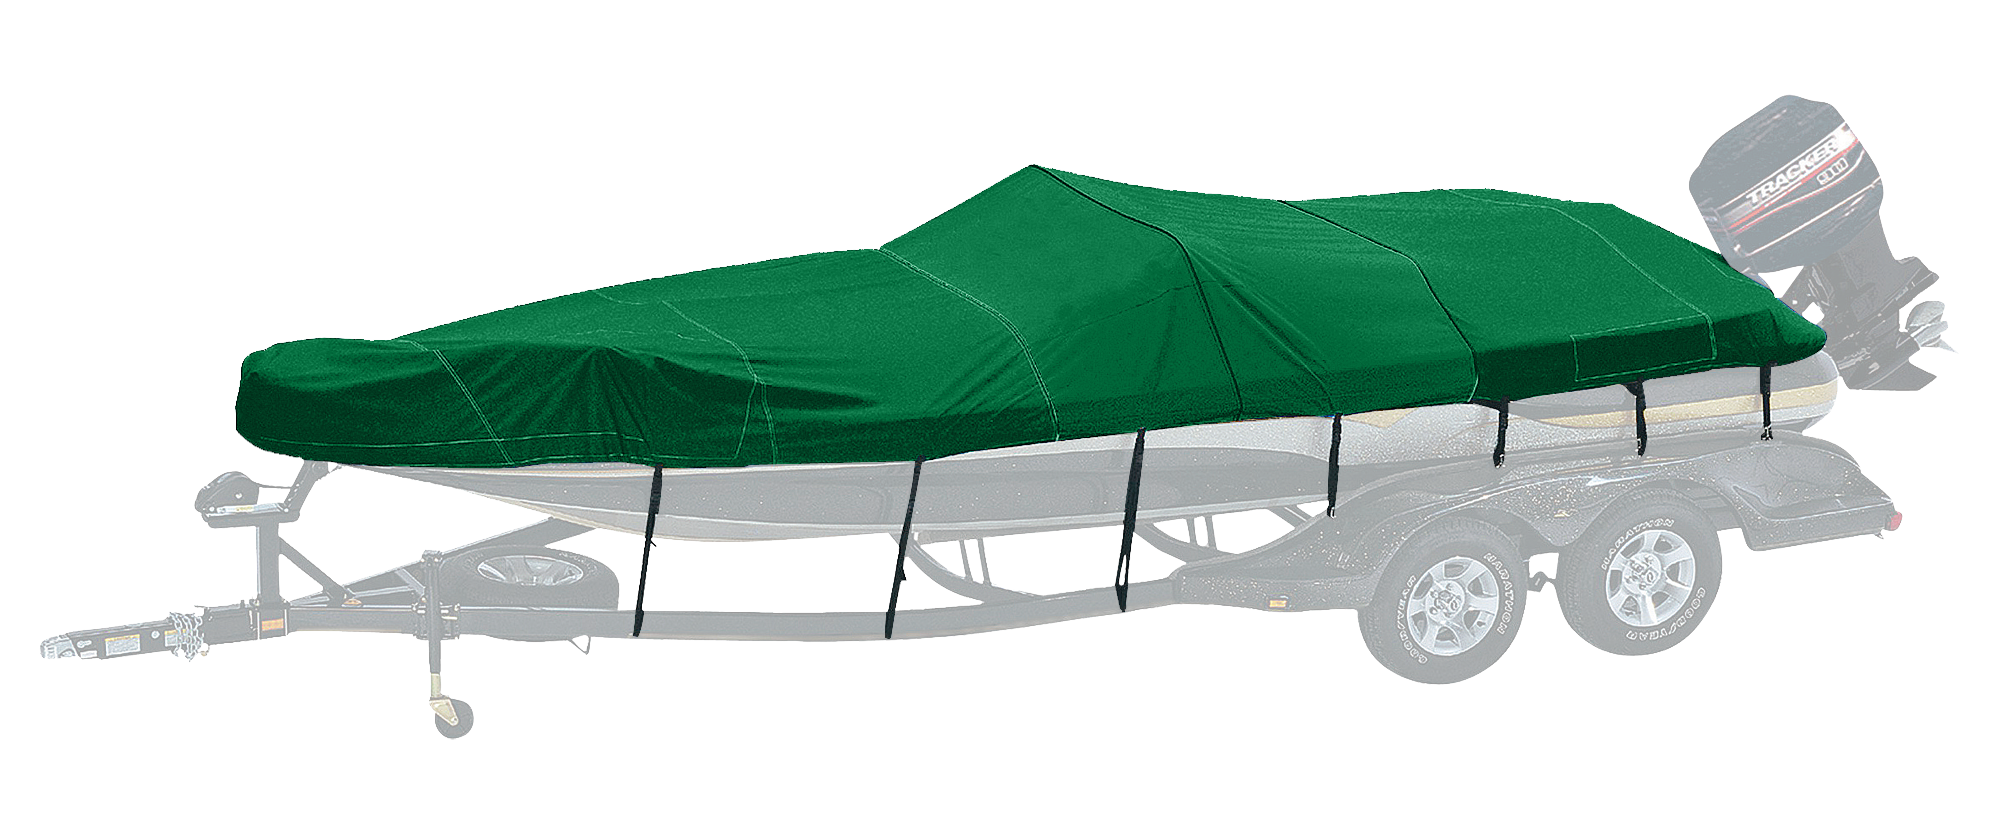 Bass Pro Shops Exact Fit Custom Boat Cover by Westland - Tracker Boats - 2002-2005 Panfish 16 SC - Forest Green